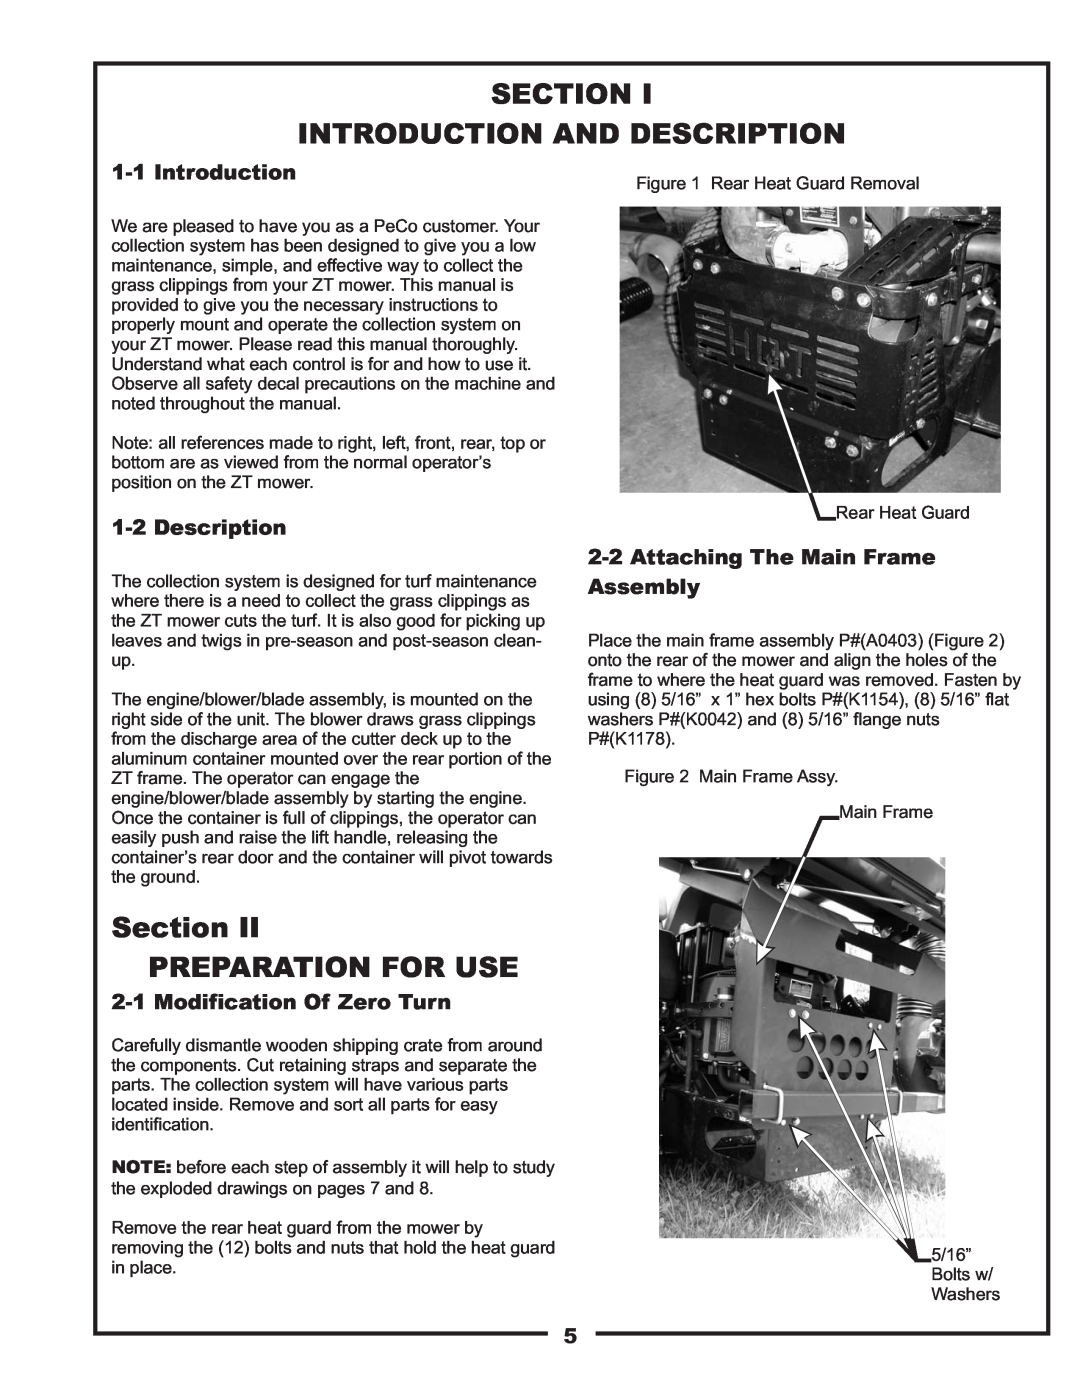 Toro 22621223-24 manual Section Introduction And Description, Section II PREPARATION FOR USE, Modification Of Zero Turn 